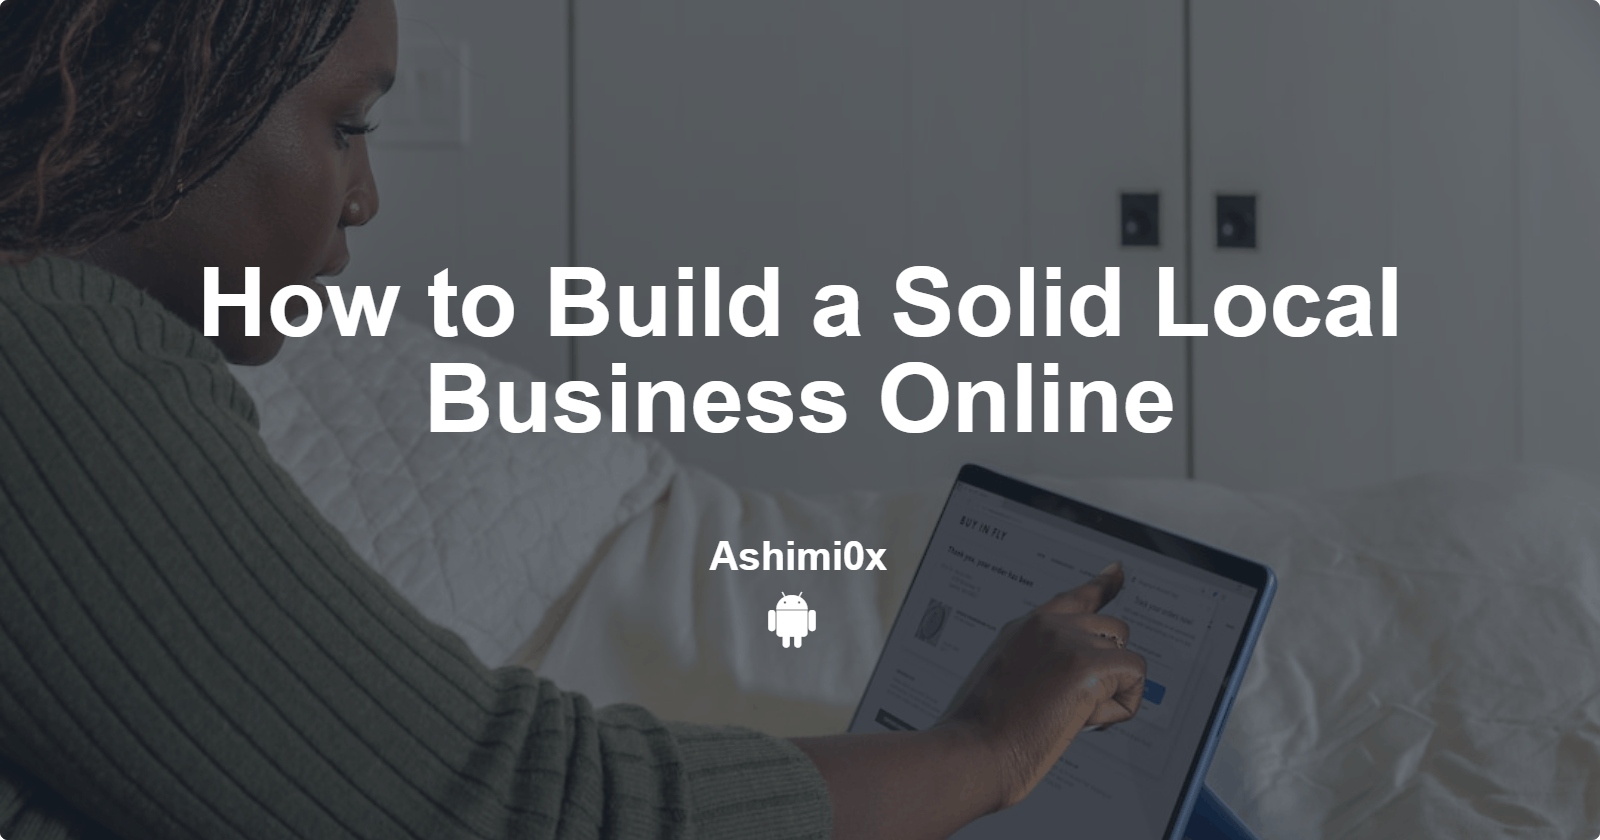 How to Build a Solid Local Business Online